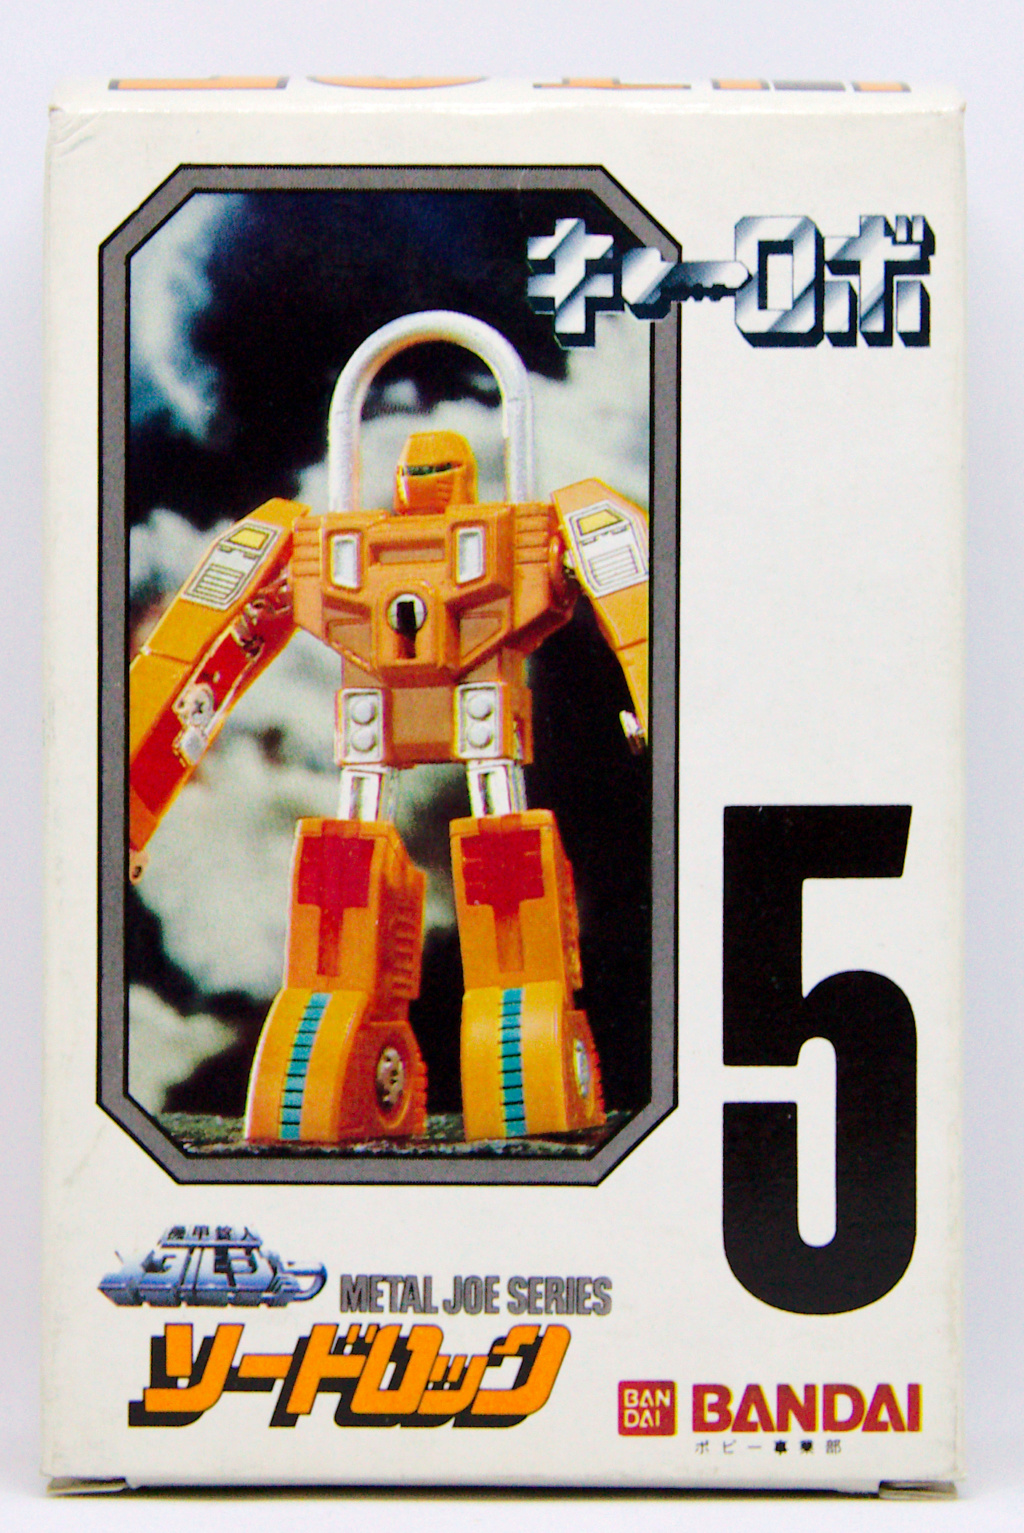 Pilgrim's collection (Gobots, Transformers...) - Page 23 Mj-05_10